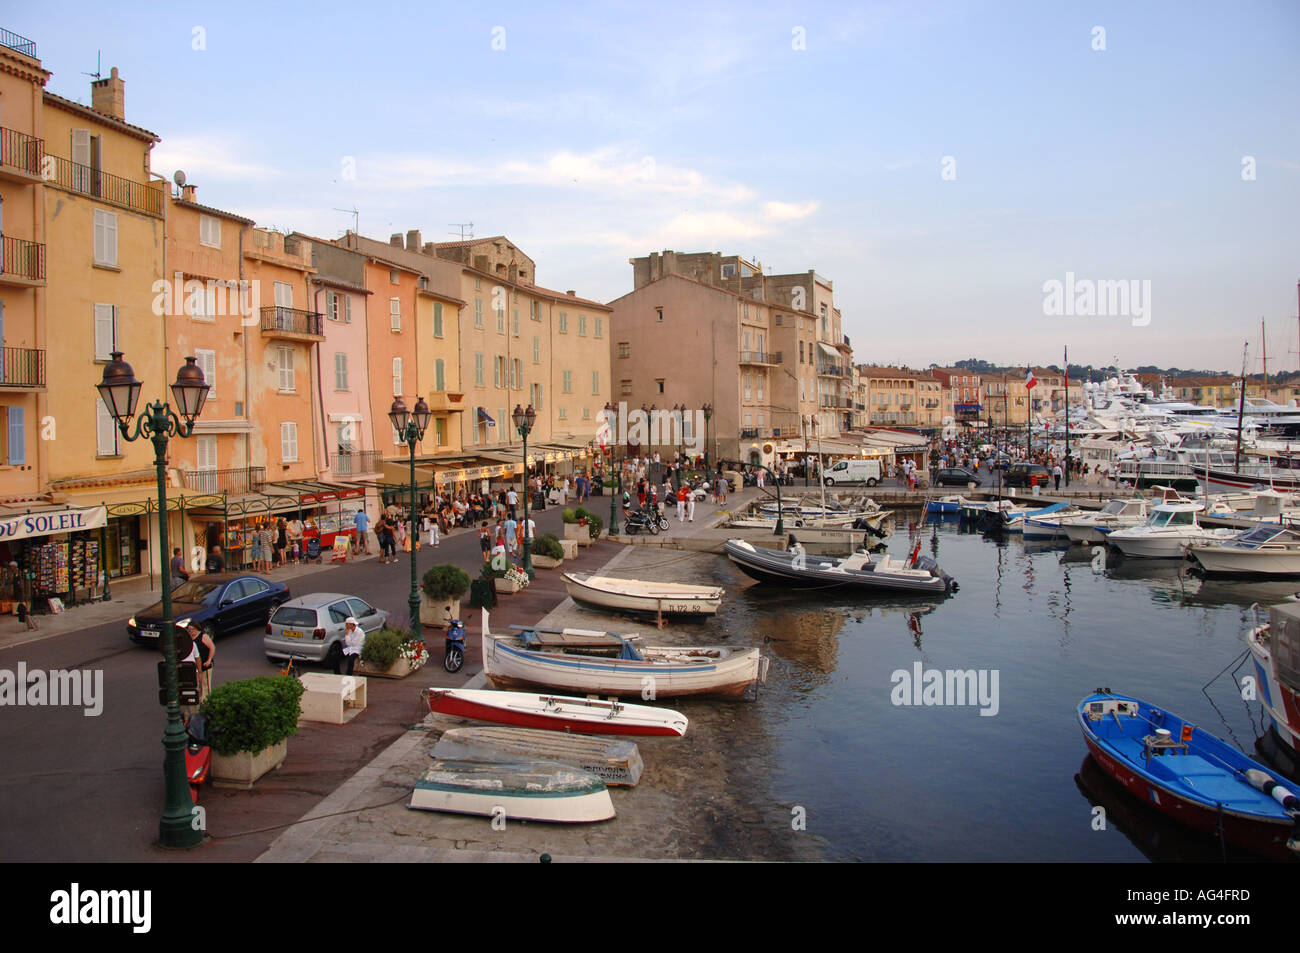 A view of the beautiful Saint Tropez harbour taken in the late sun with ...